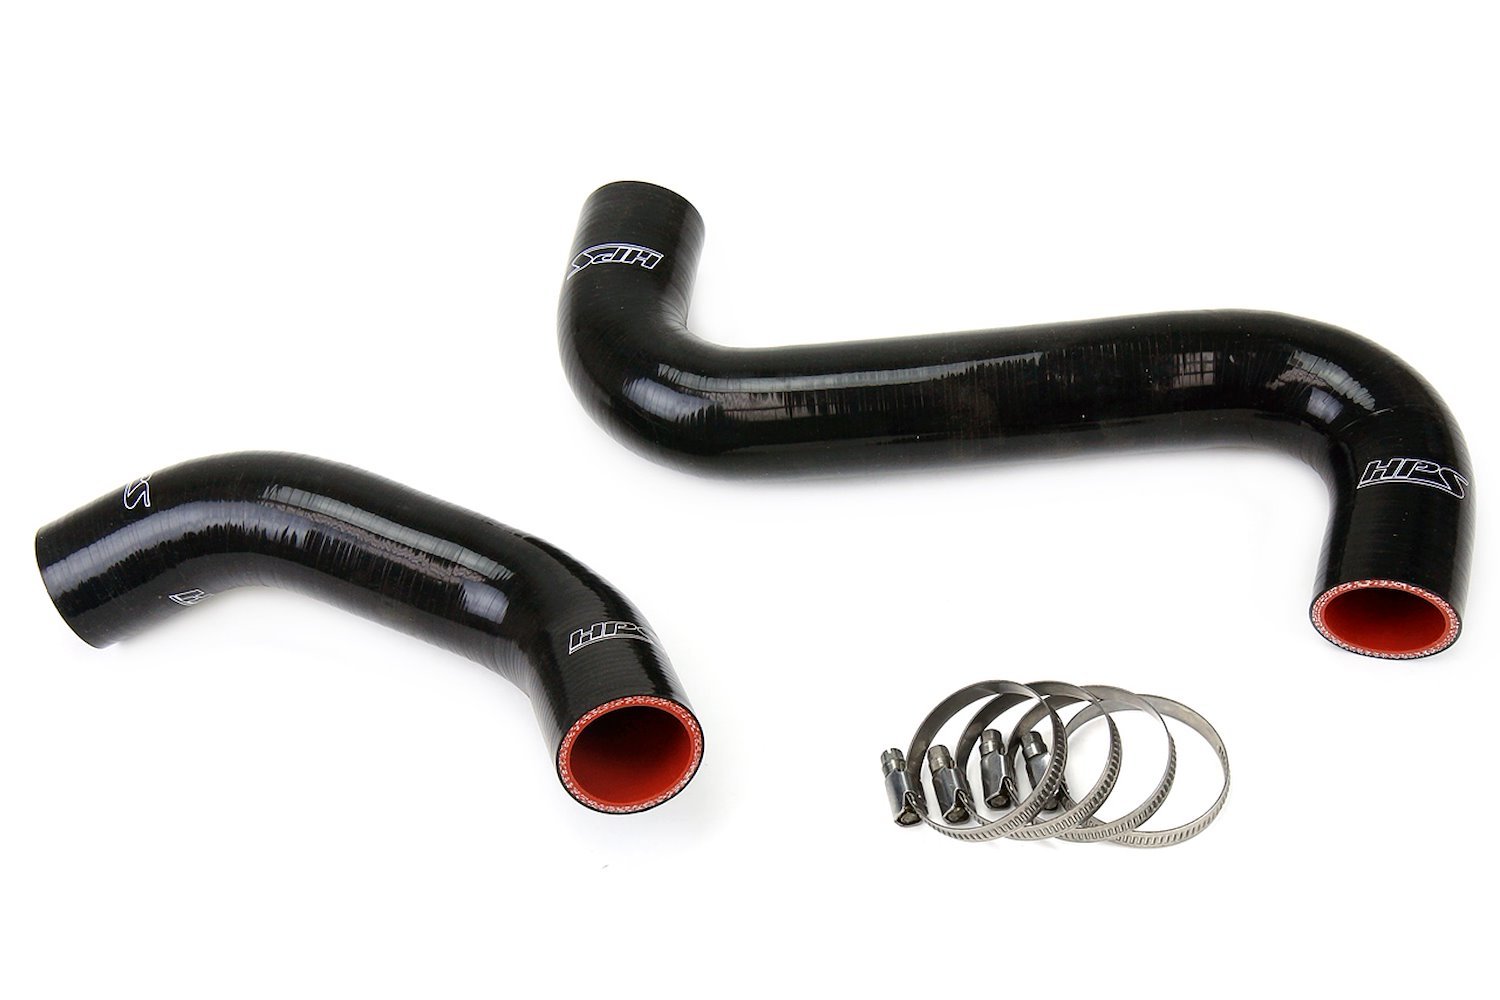 57-1061-BLK Radiator Hose Kit, High-Temp 3-Ply Reinforced Silicone, Replace OEM Rubber Radiator Coolant Hoses